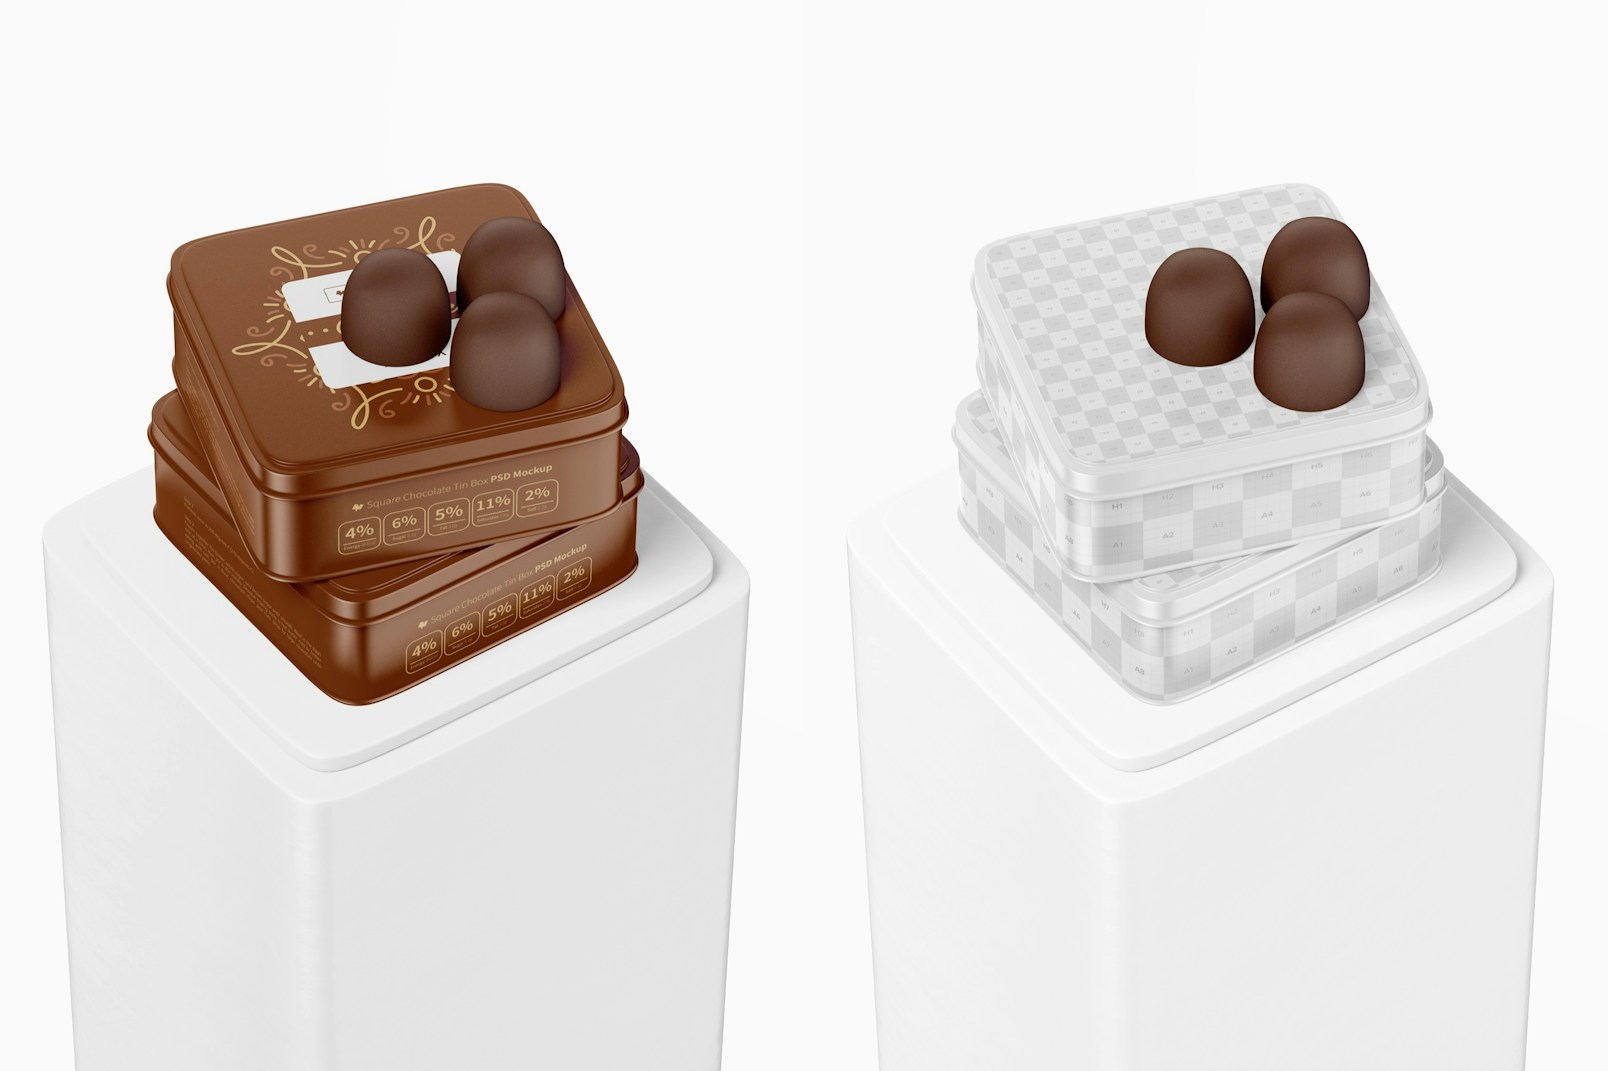 Square Chocolate Tin Boxes Mockup, Opened and Closed